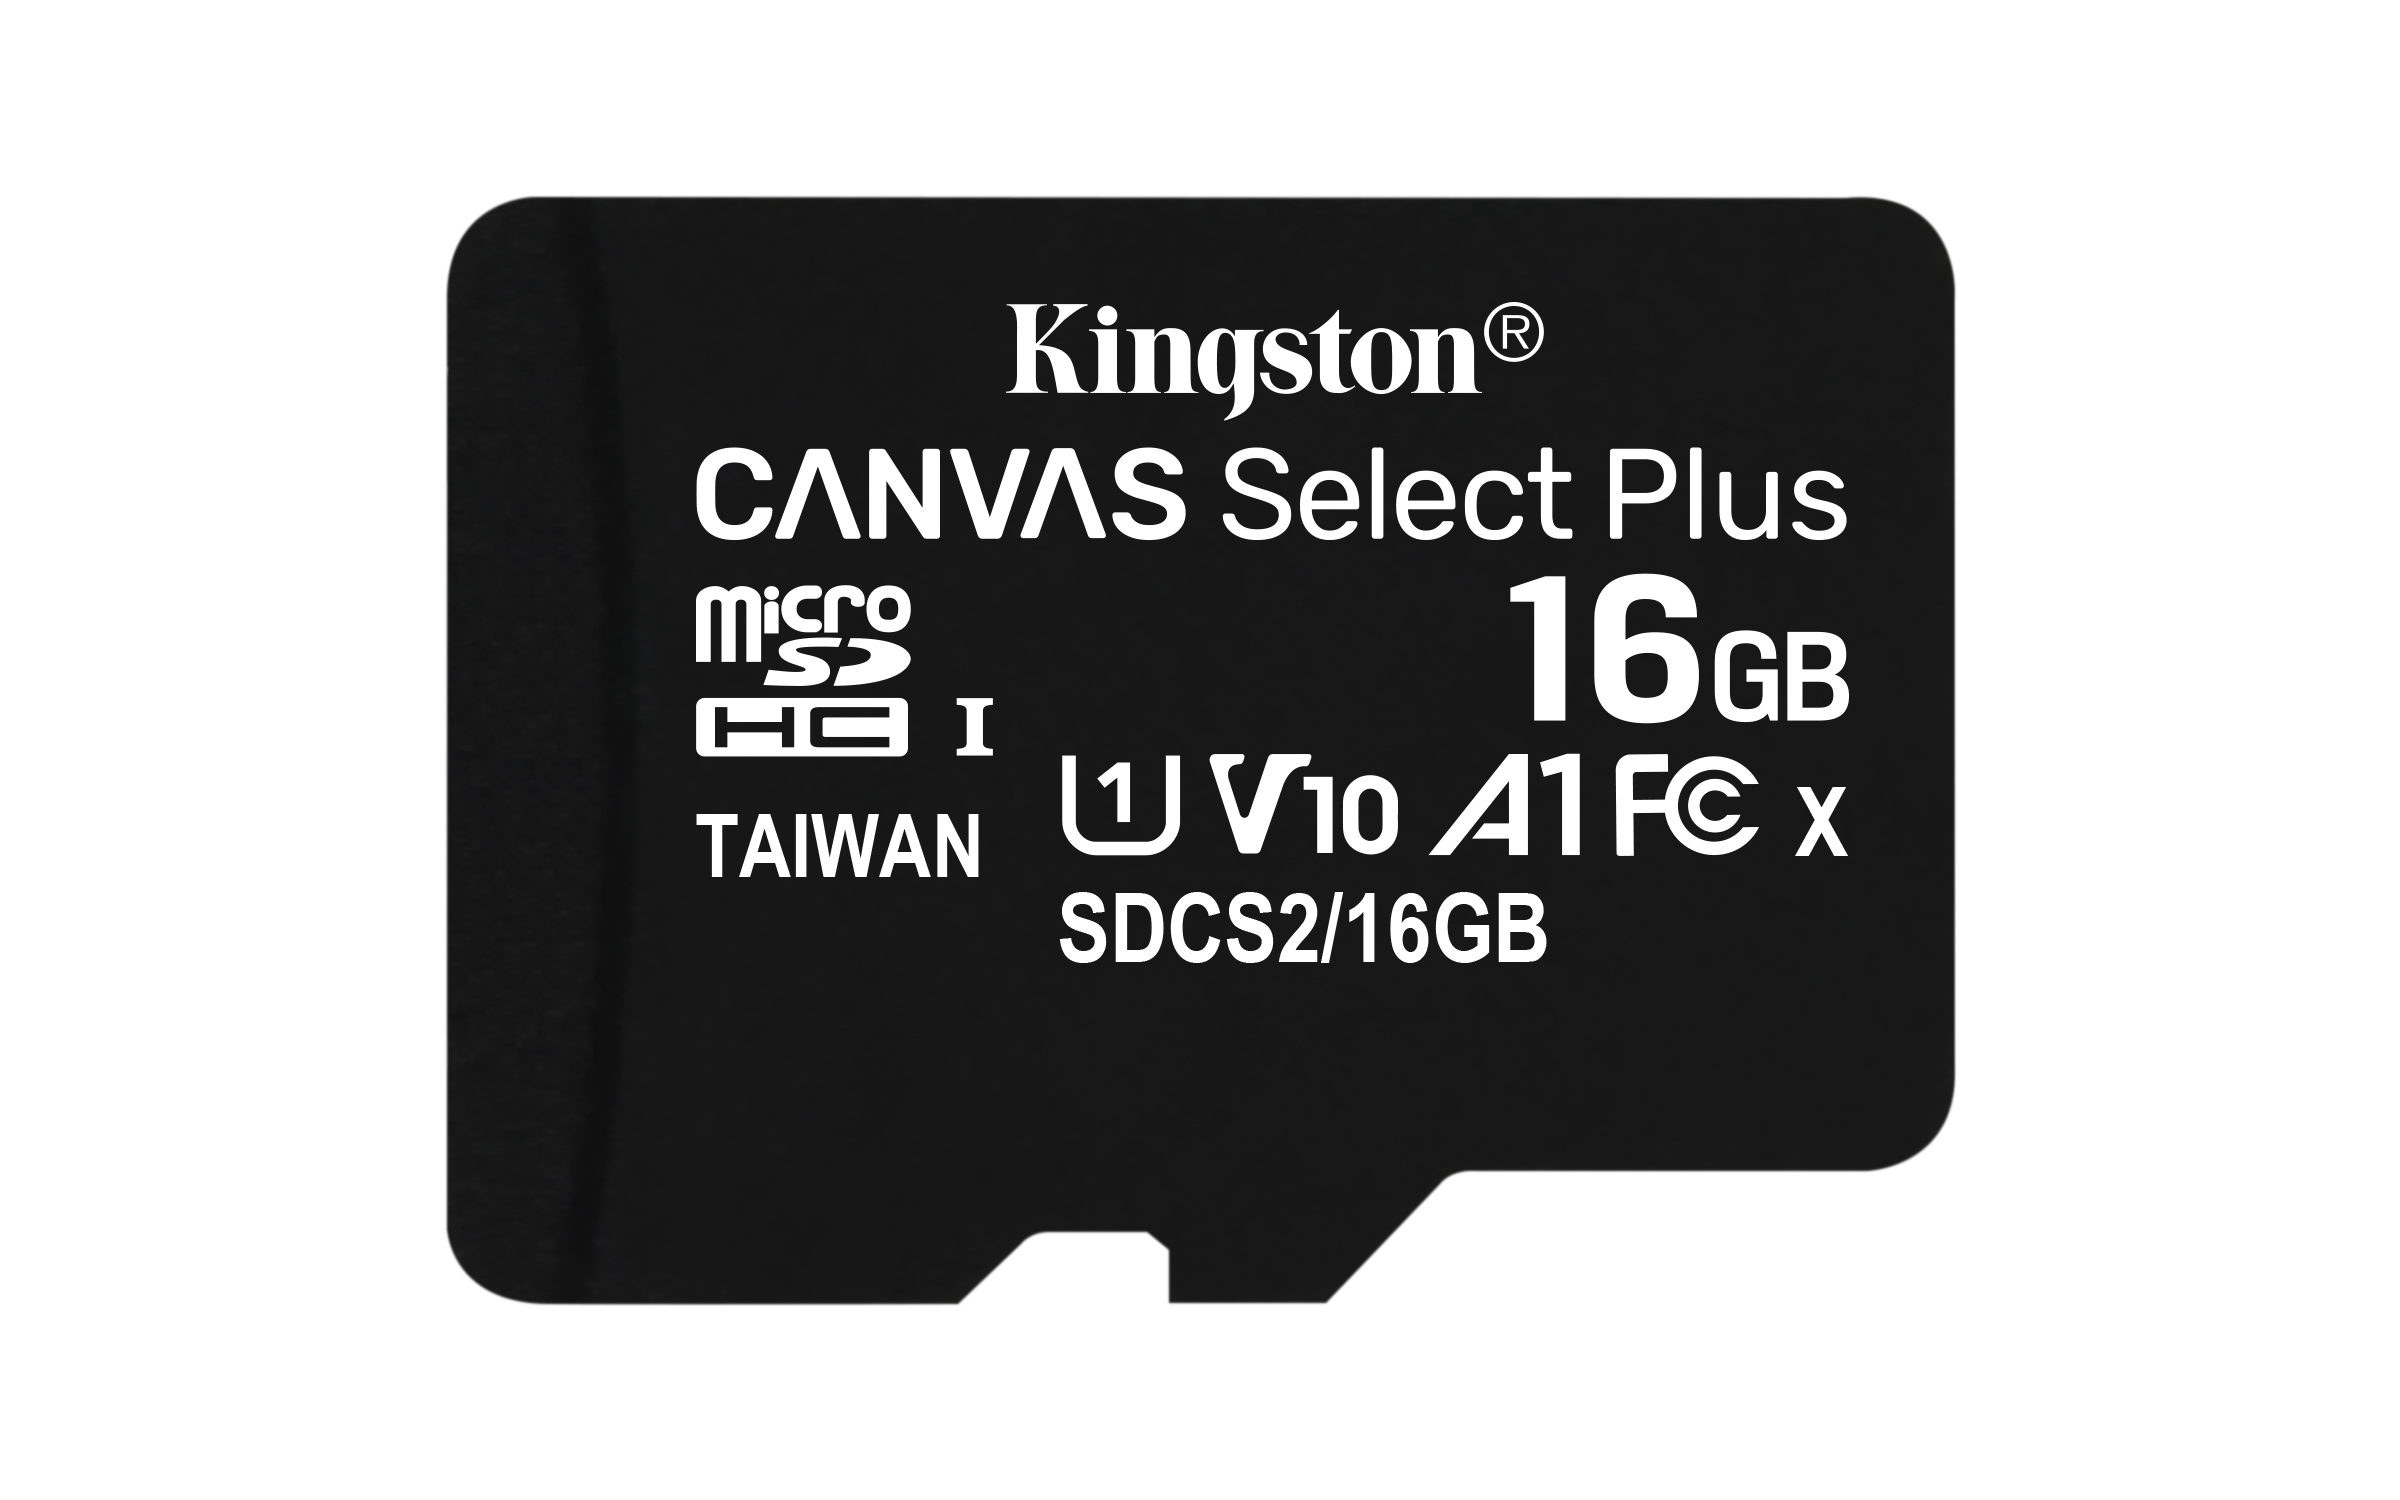 Micro Sd Kingston 16Gb Micsdhc Canvas Select Plus Two Pack C Adapt